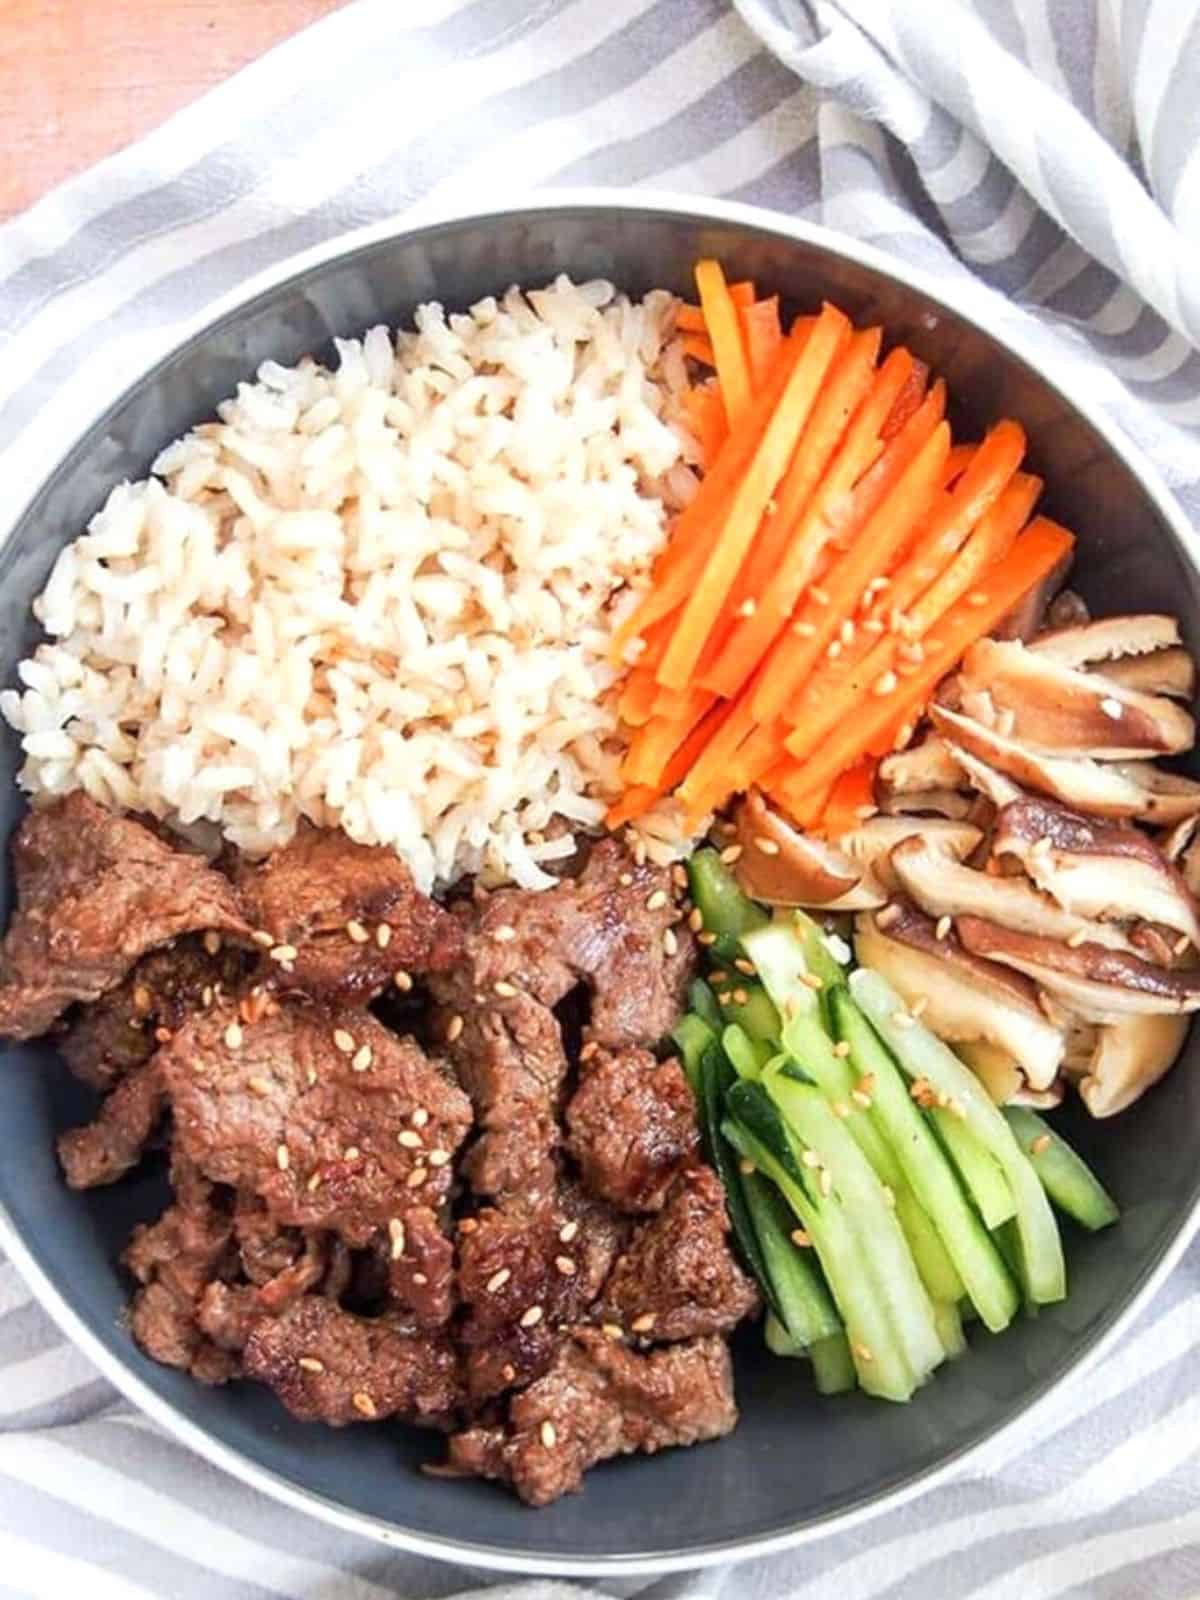 Fried beef over rice with cut vegetables in a bowl.